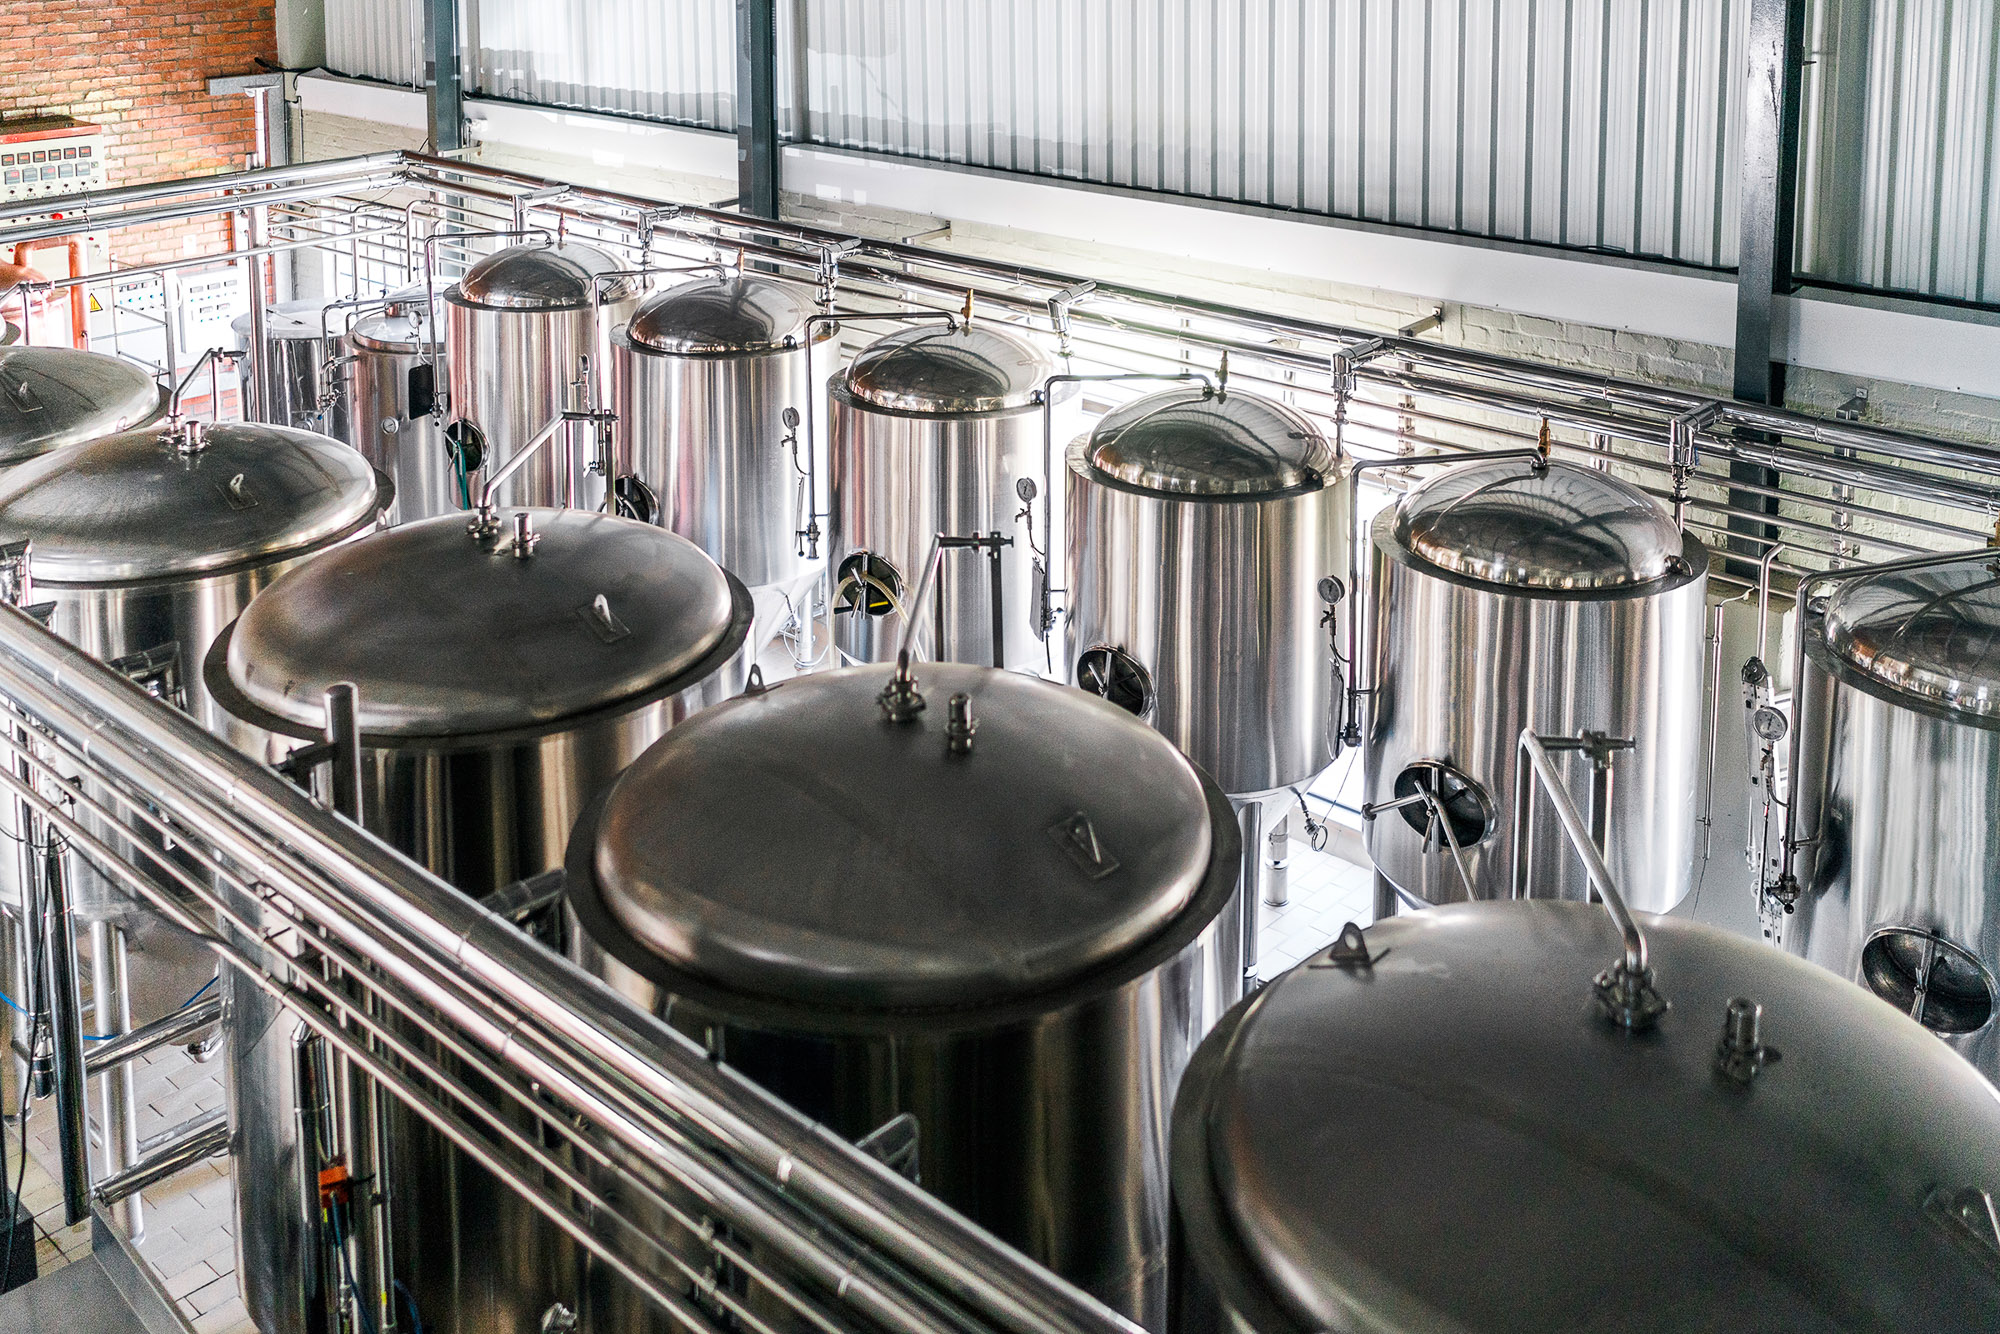 Stainless steel vats in a factory